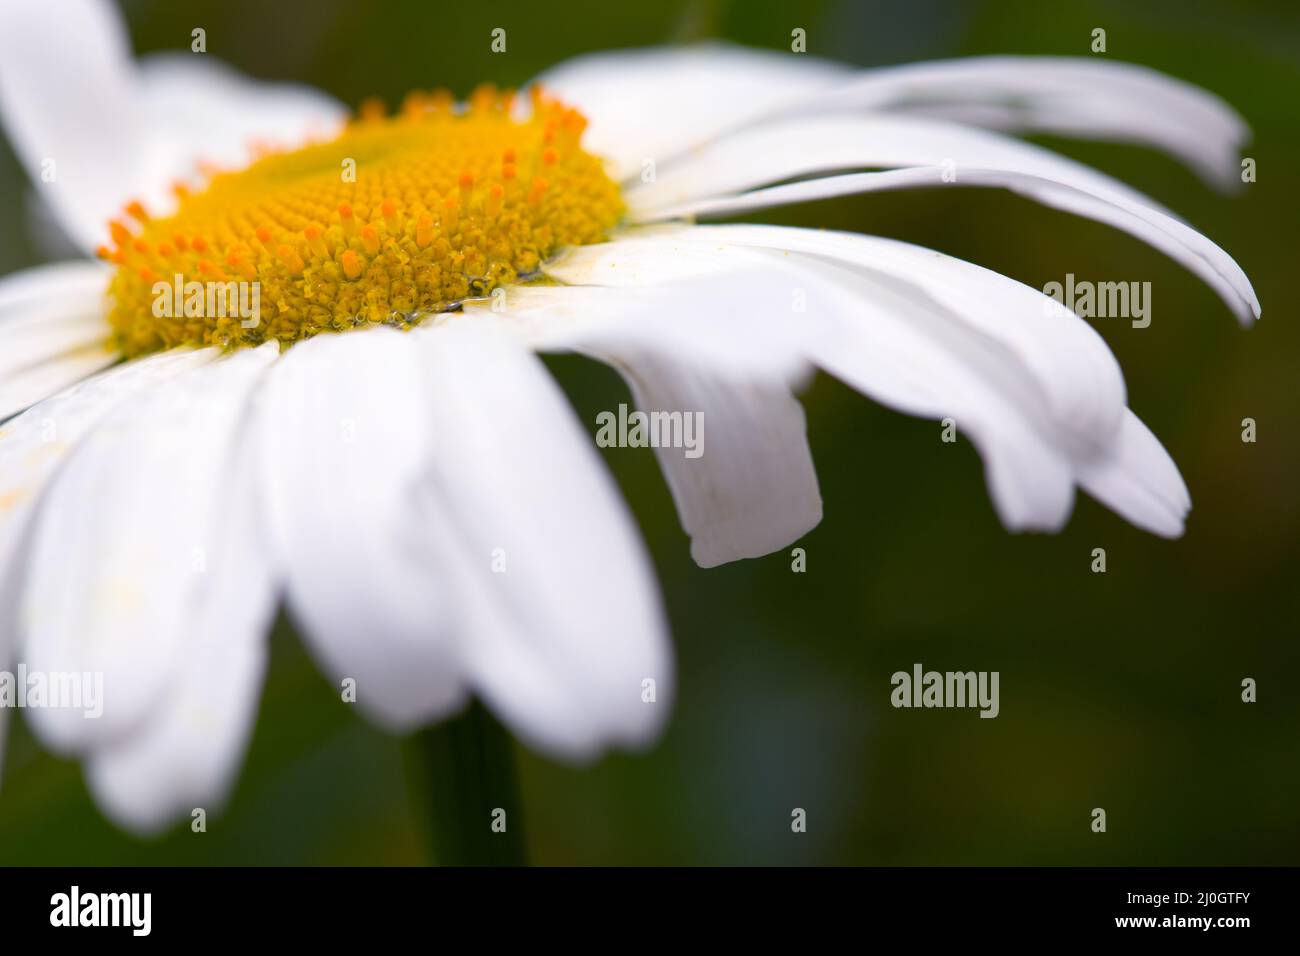 White daisy flower in sunset light. Close-up of a daisy flower Stock Photo